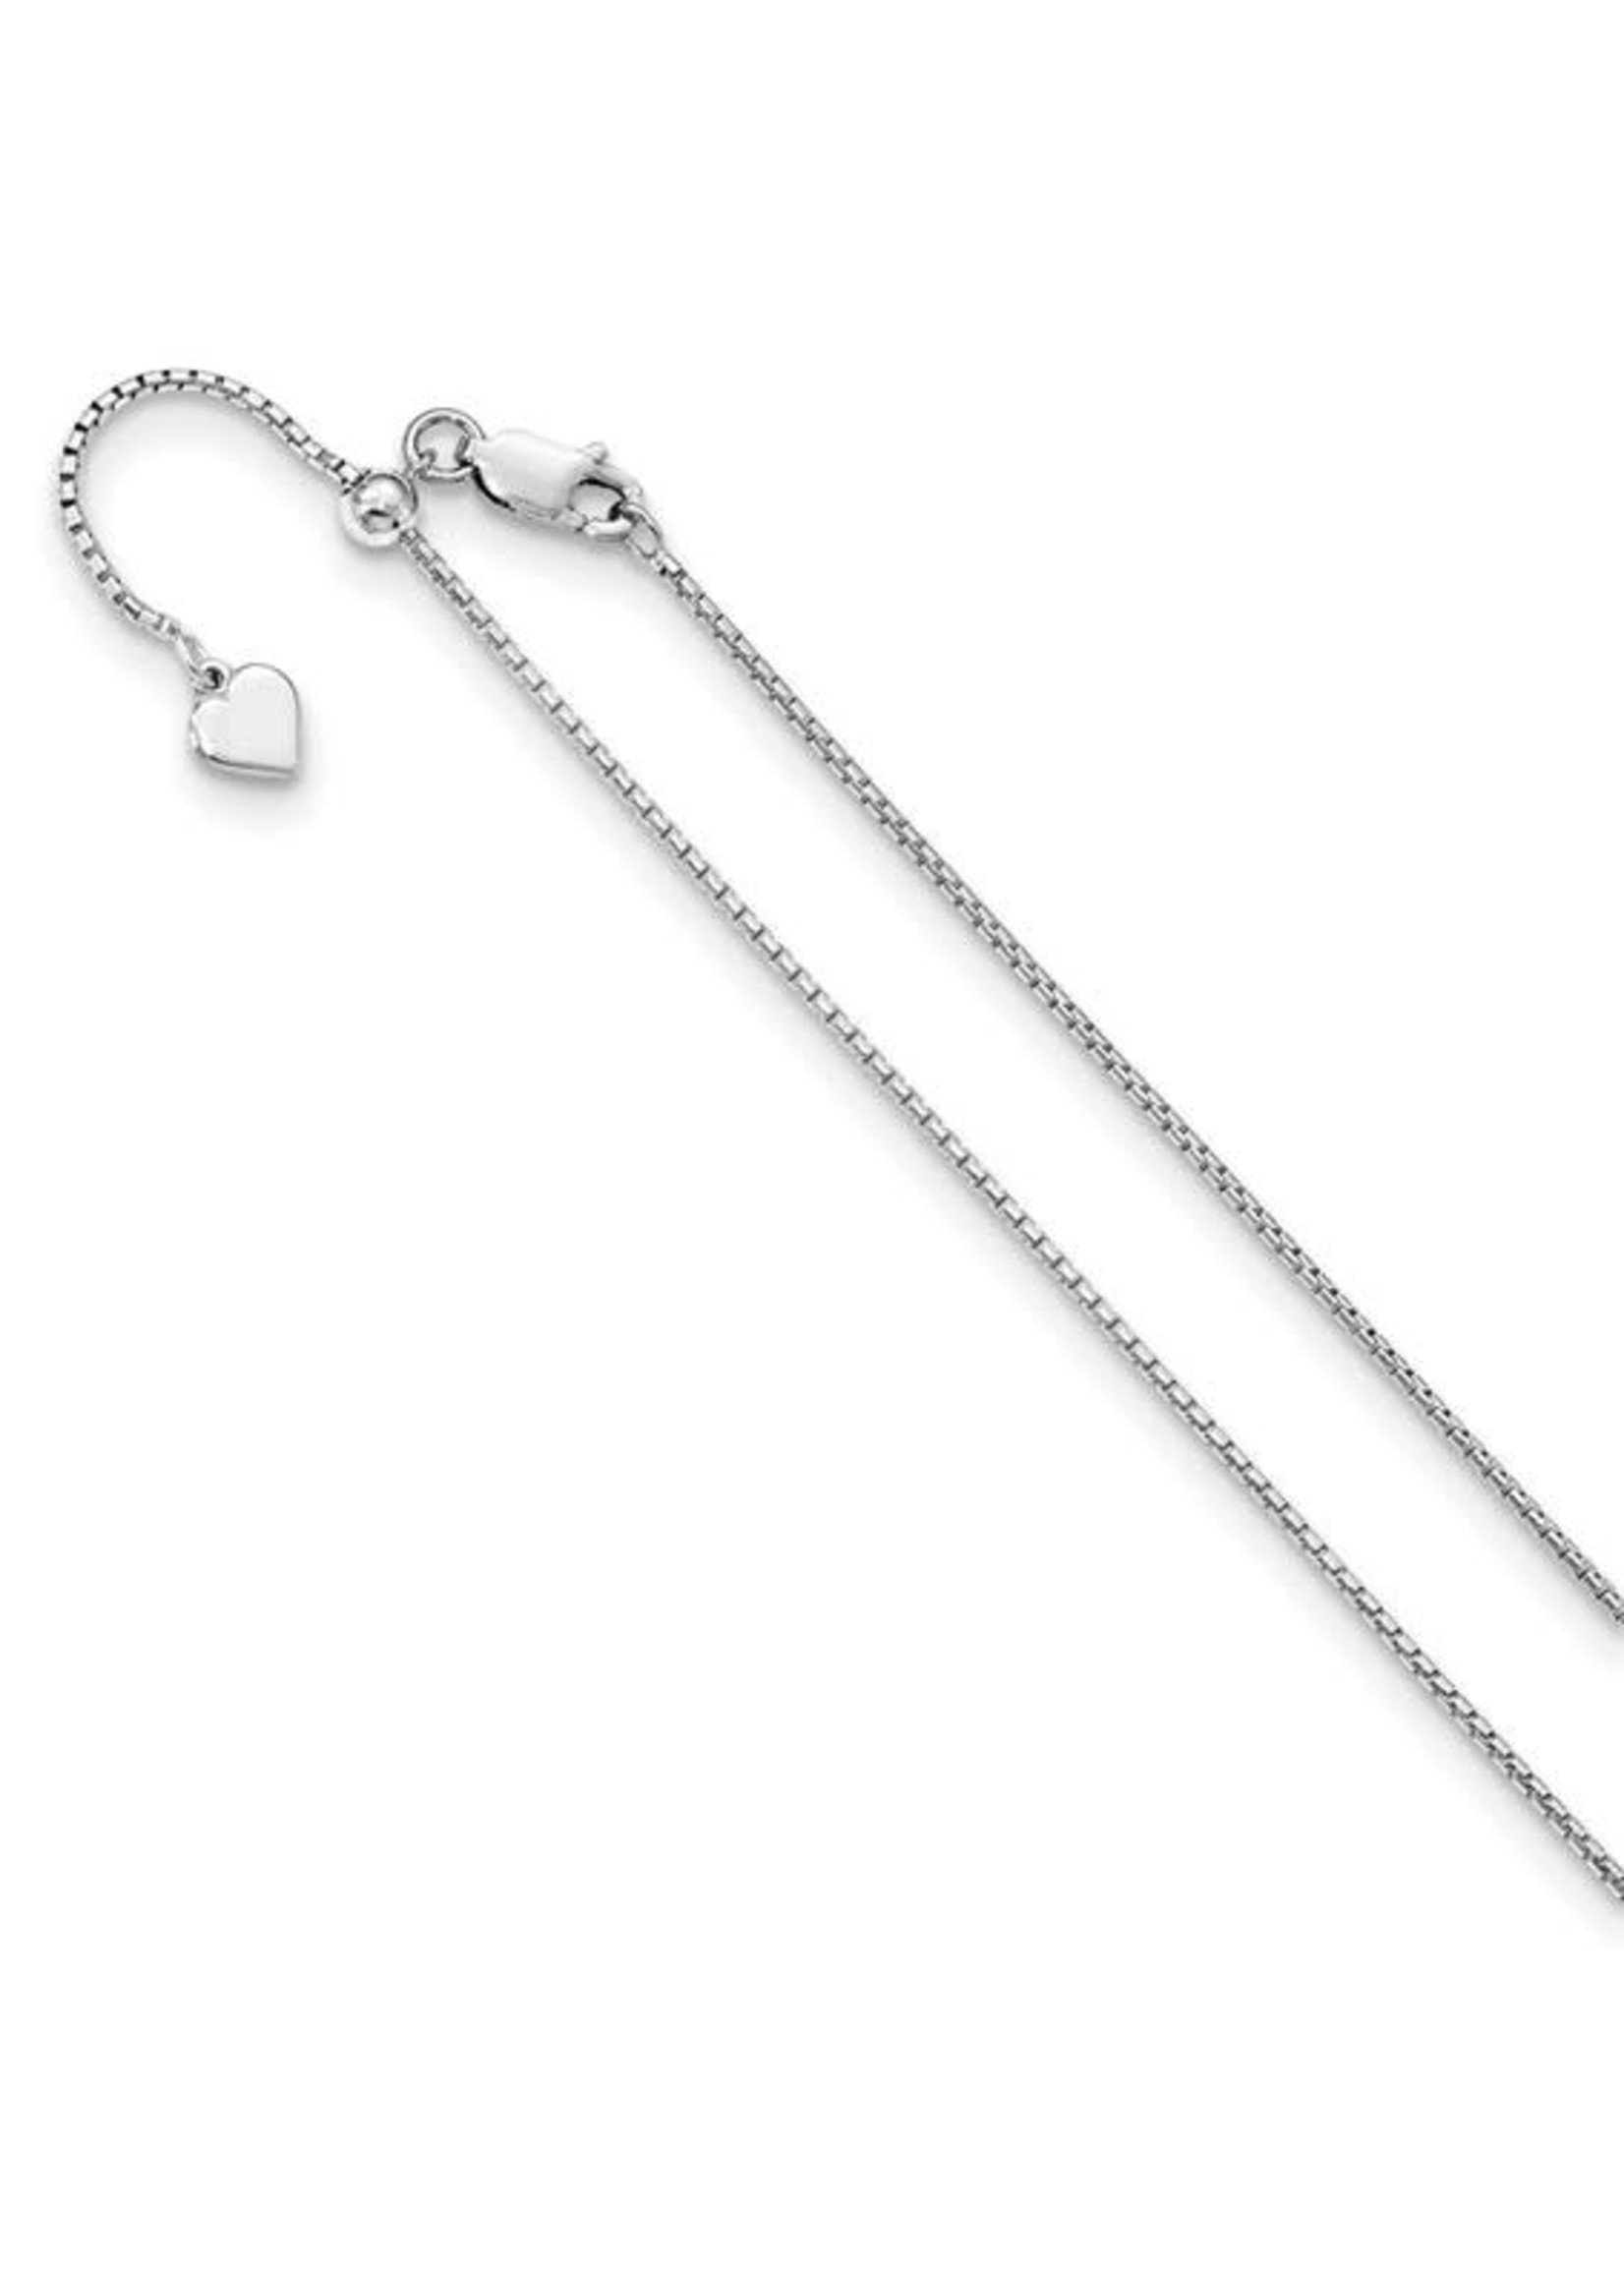 Sterling Silver Adjustable 1.25mm Round Box Chain